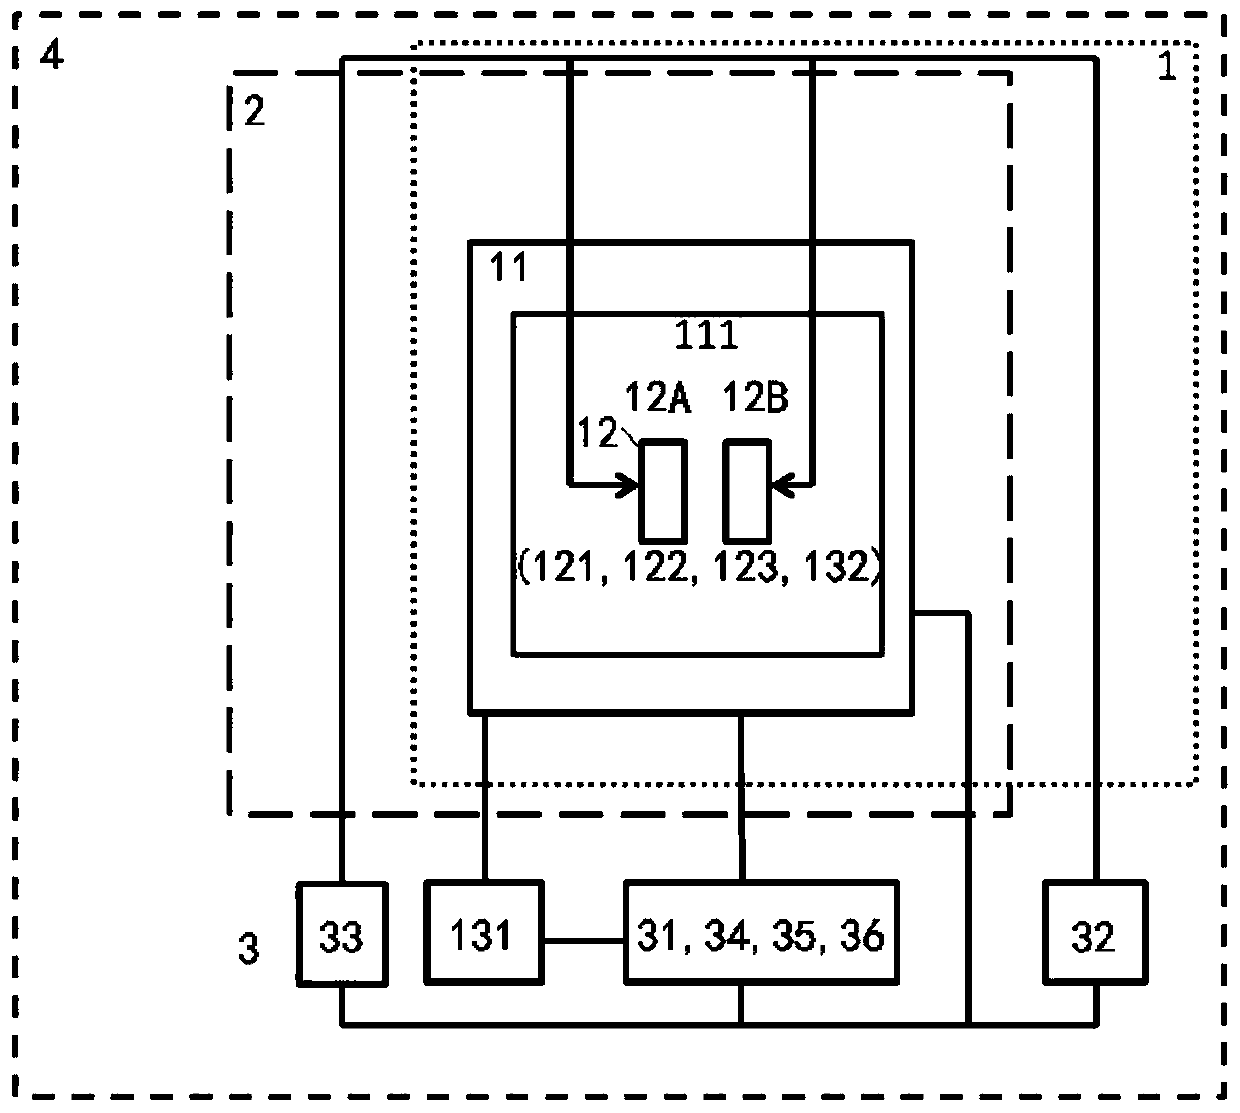 Thermal power measurement device with Raman spectroscopy measurement function